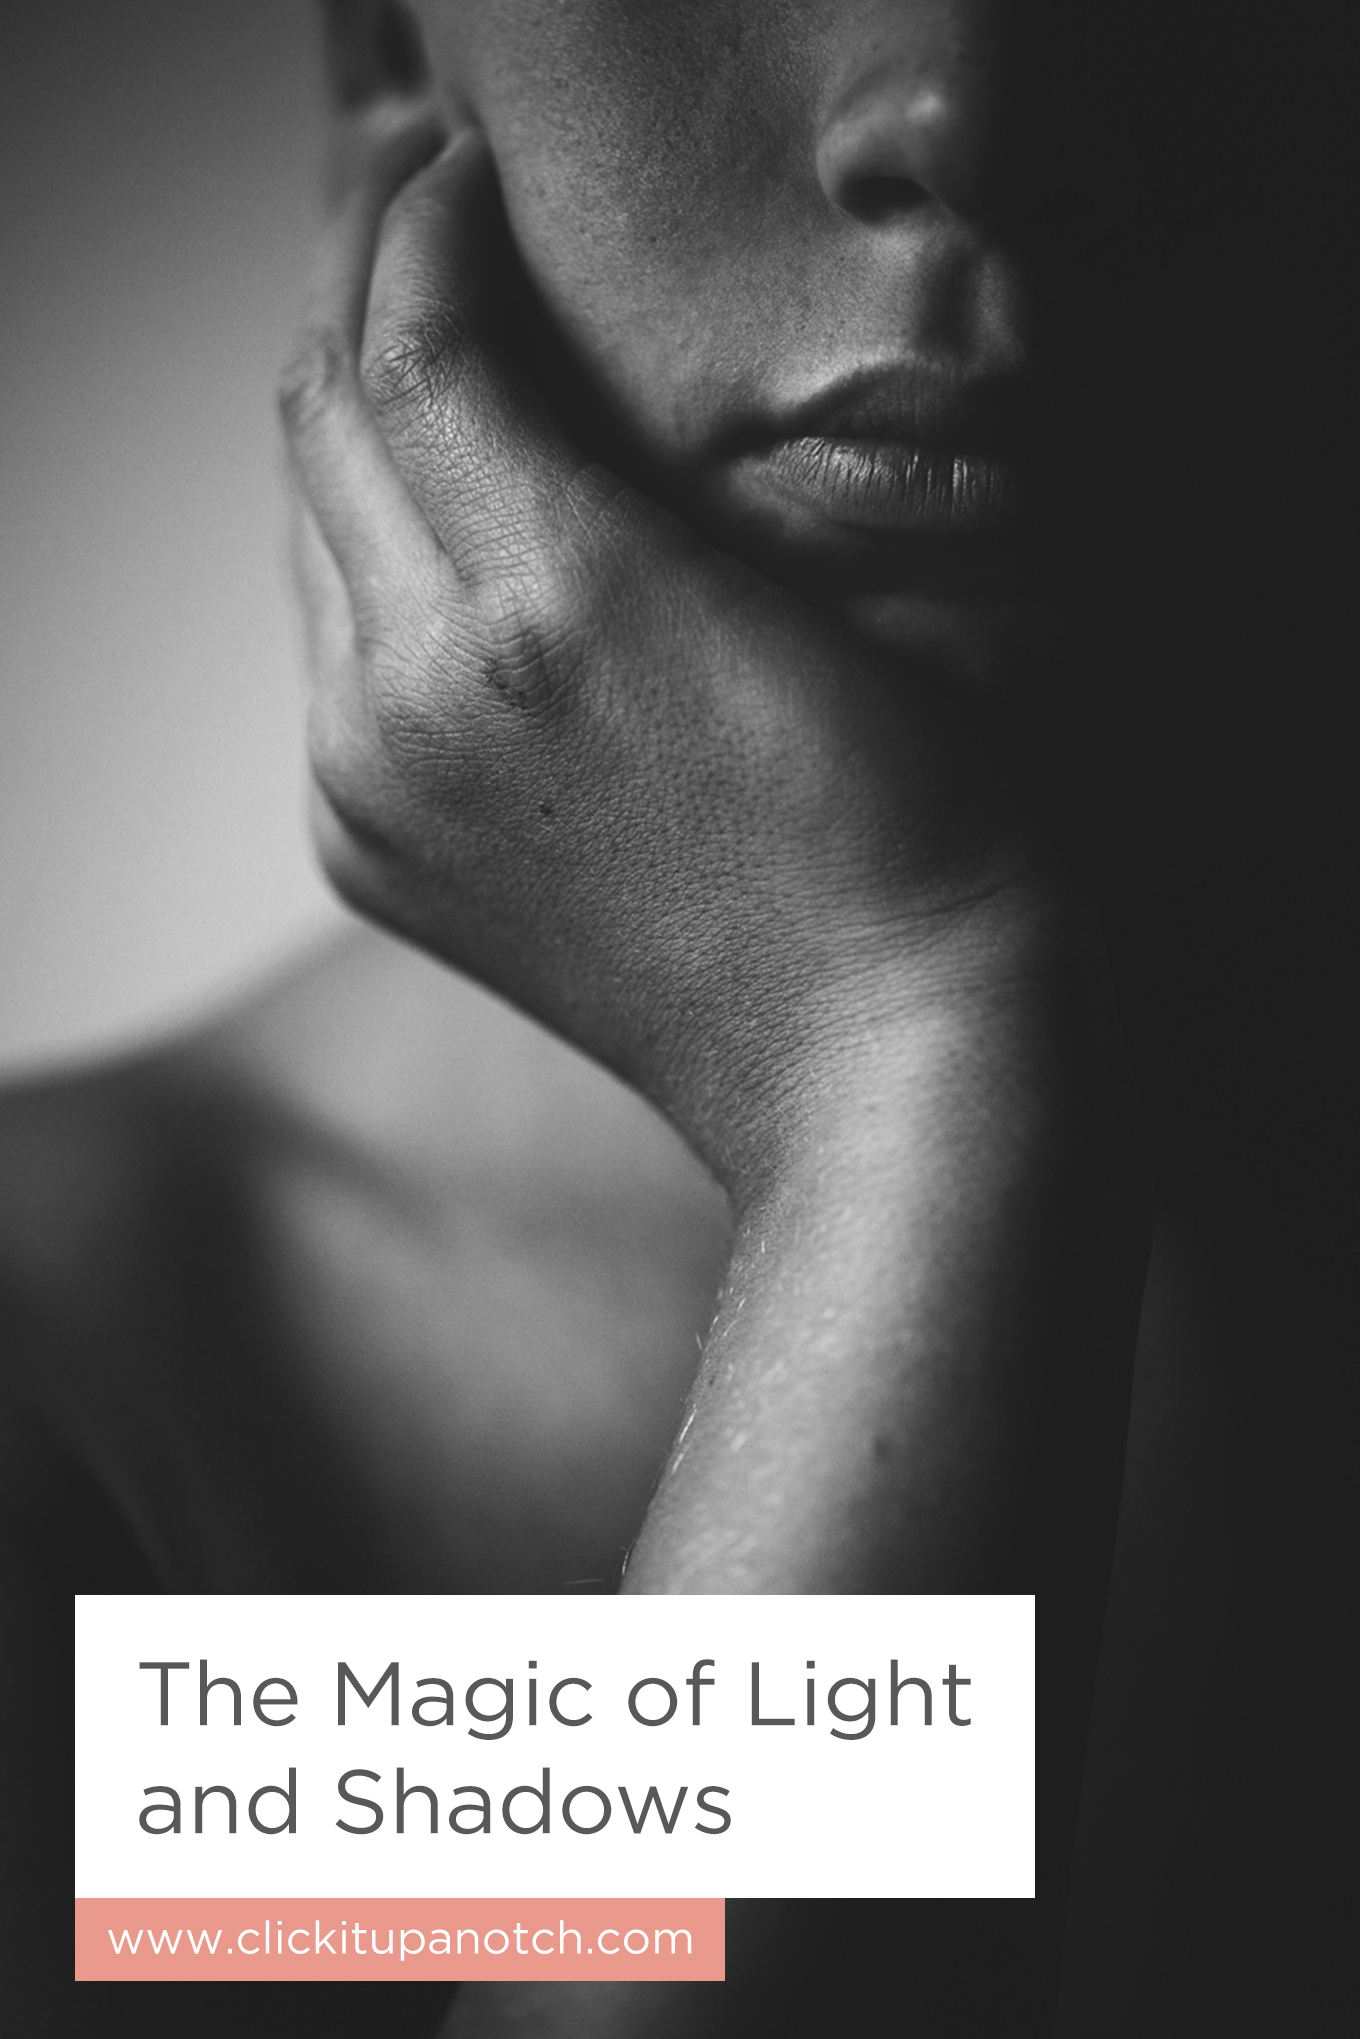 Must read if you want to incorporate more shadows in your photography! Read - "The Magic of Light and Shadows"